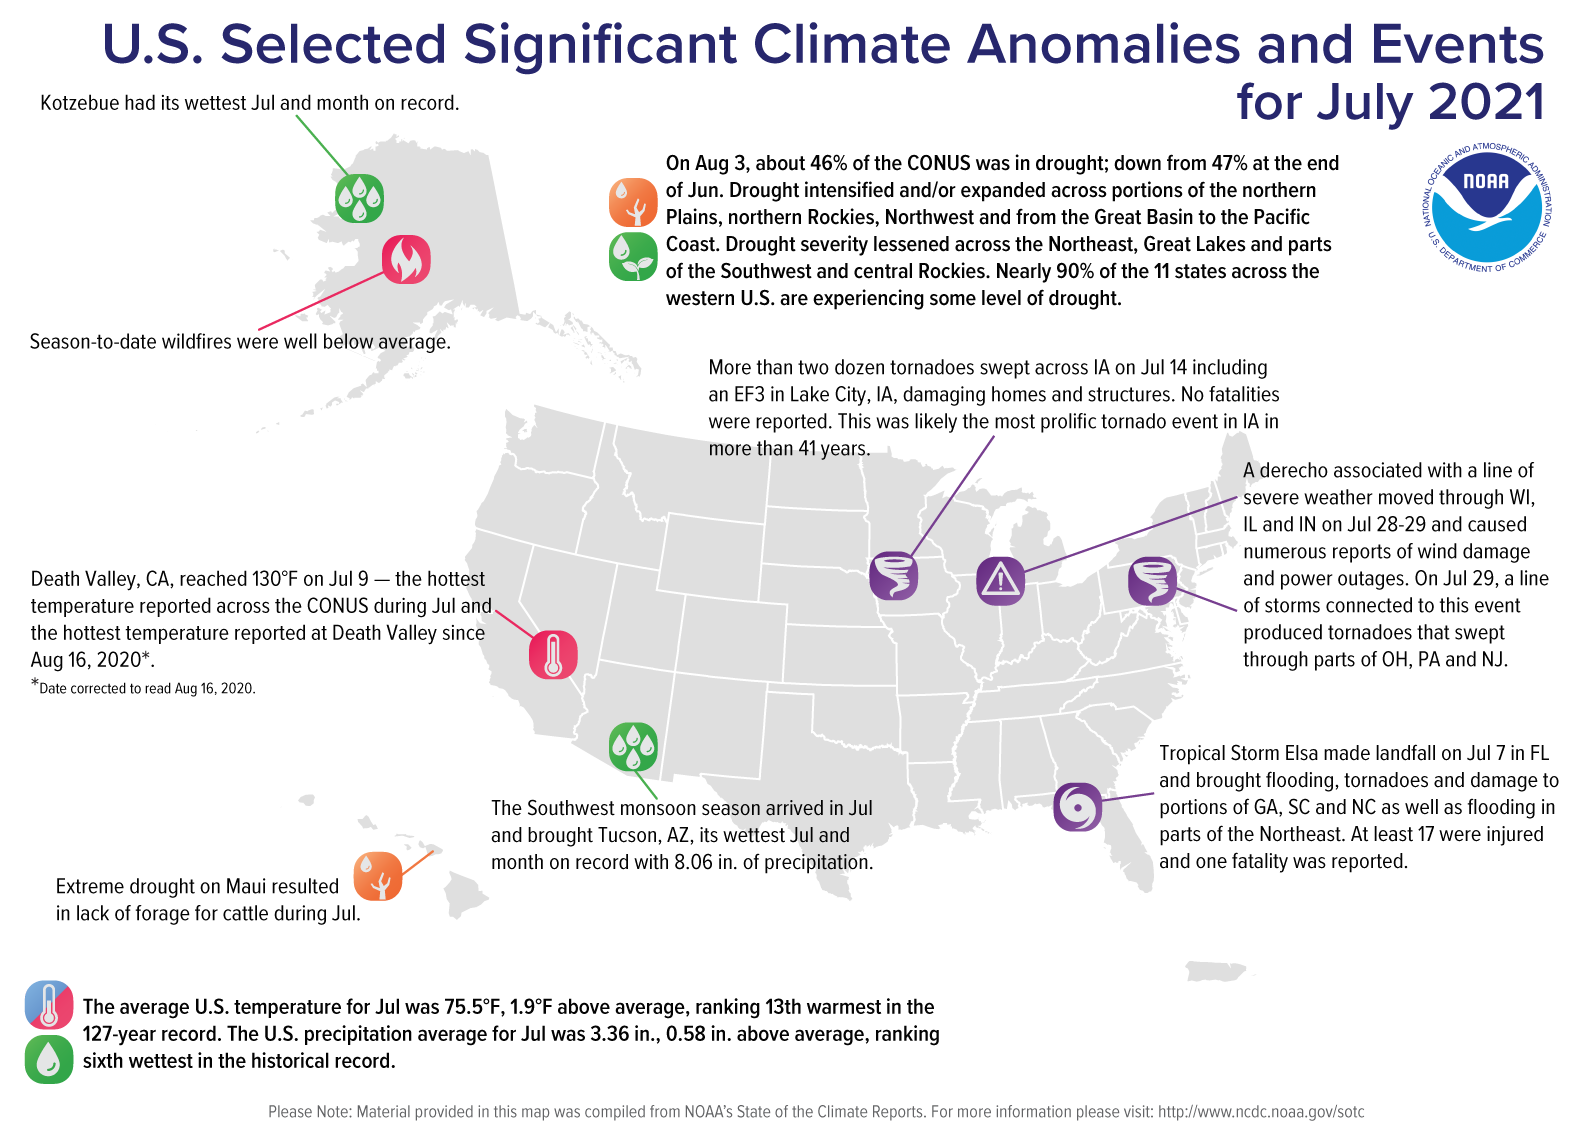 A map of the United States plotted with significant climate events that occurred during June 2021. Please see article text below as well as the full climate report highlights at http://bit.ly/USClimate202107. 